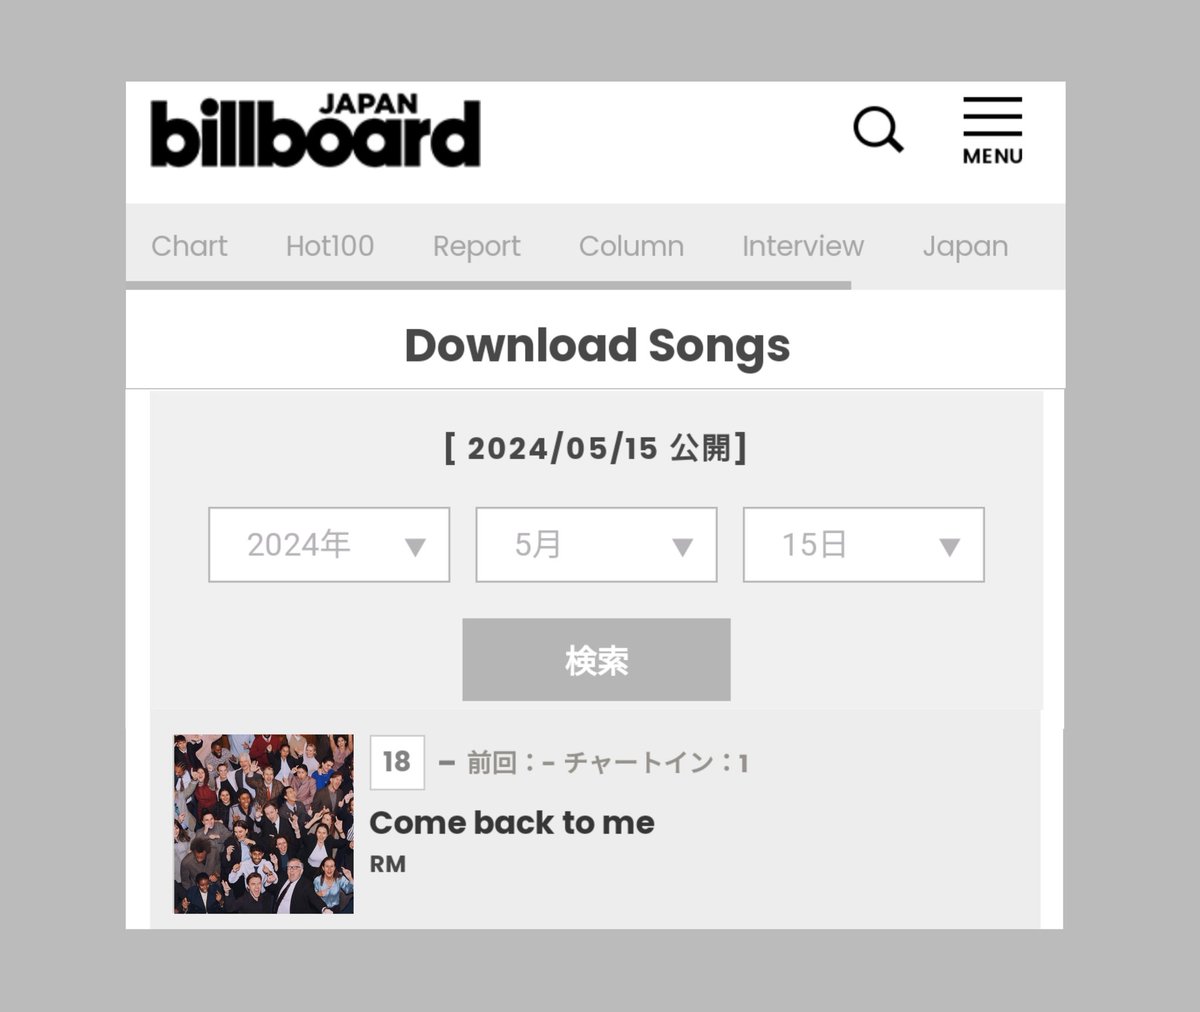 'Come back to me' by #RM debuted at #18 on Billboard Japan Download Songs Chart! 🇯🇵